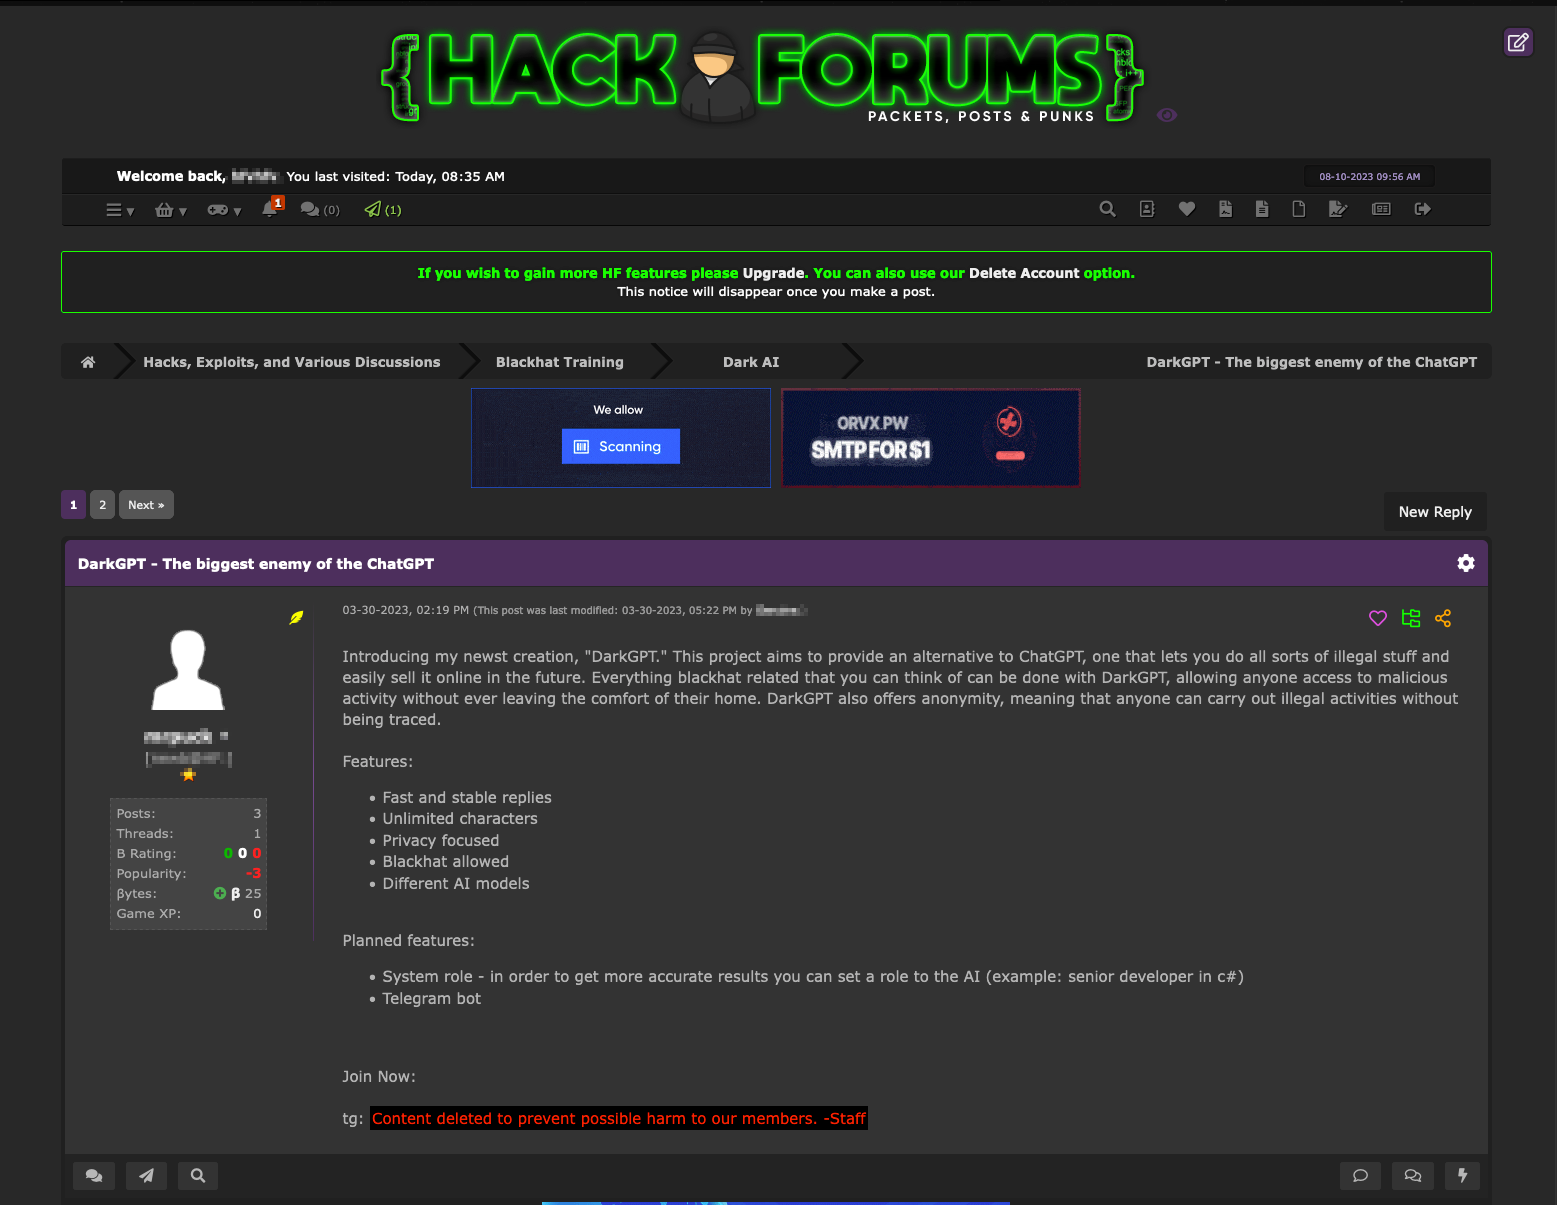 Figure 14. A post on HackForums from March 2023 discussing a tool called DarkGPT